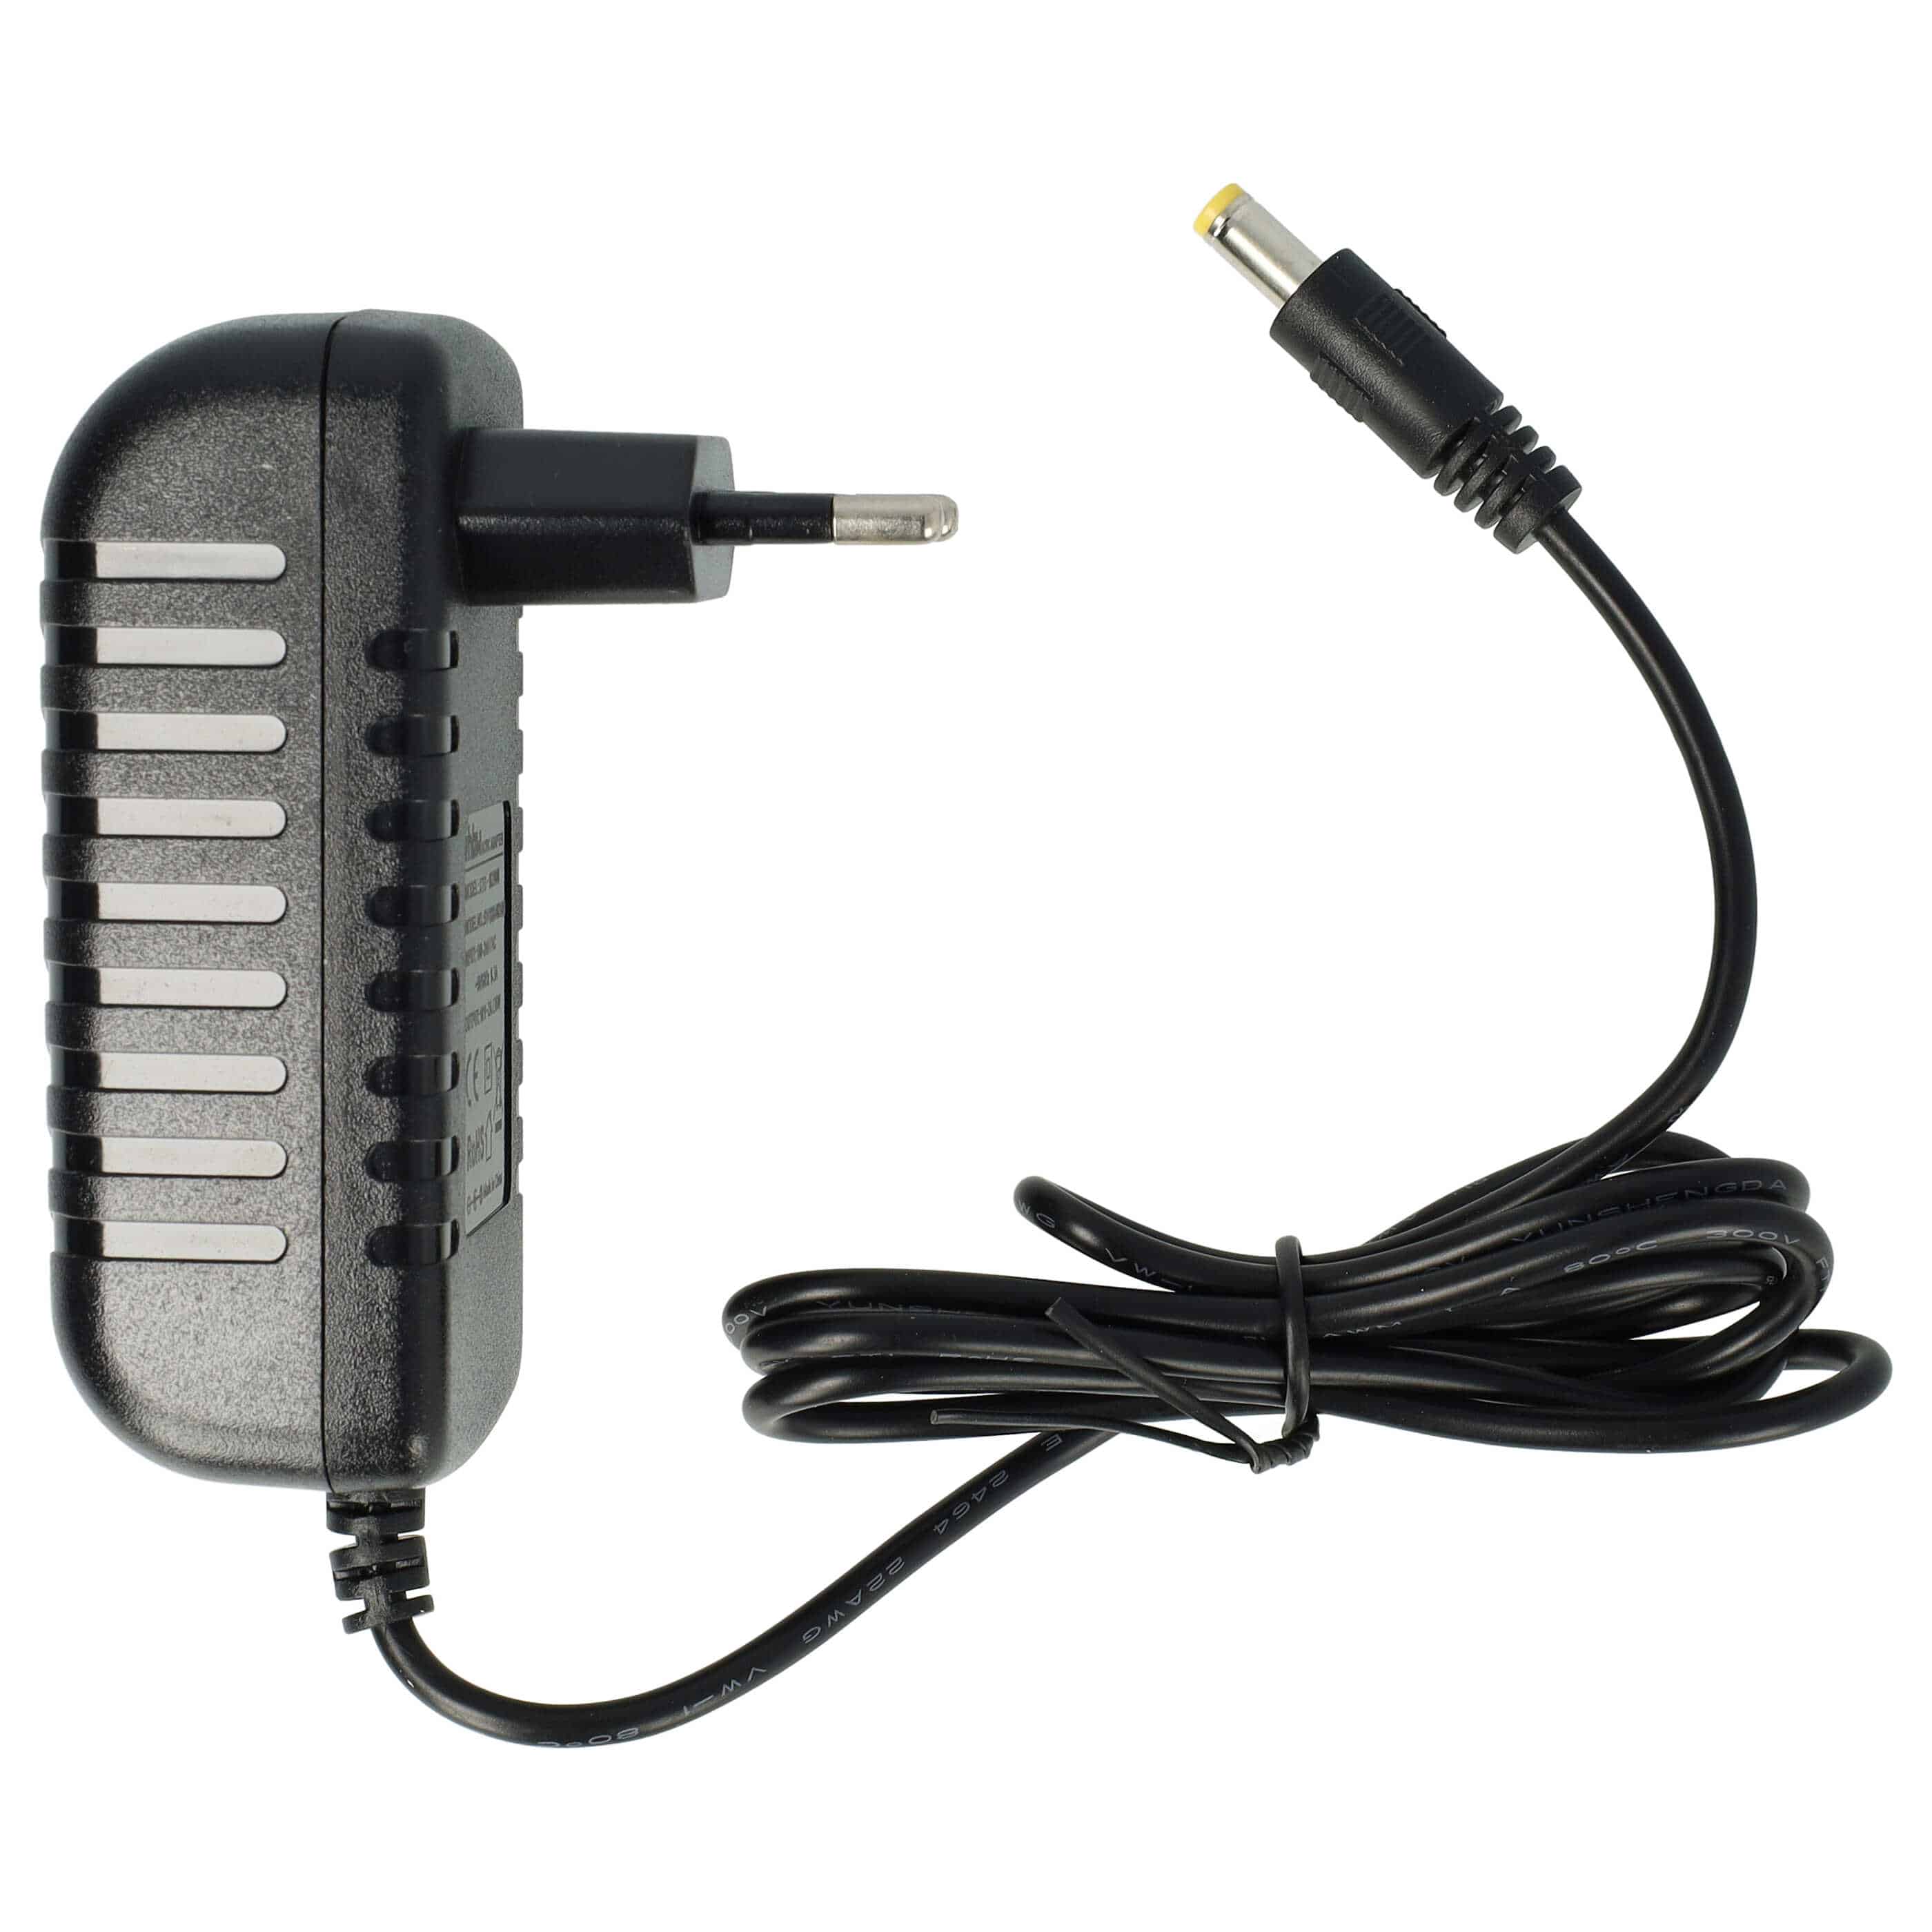 Mains Power Adapter suitable for PC Engines ALIX.2C0 Electric Devices - 18 V, 2 A